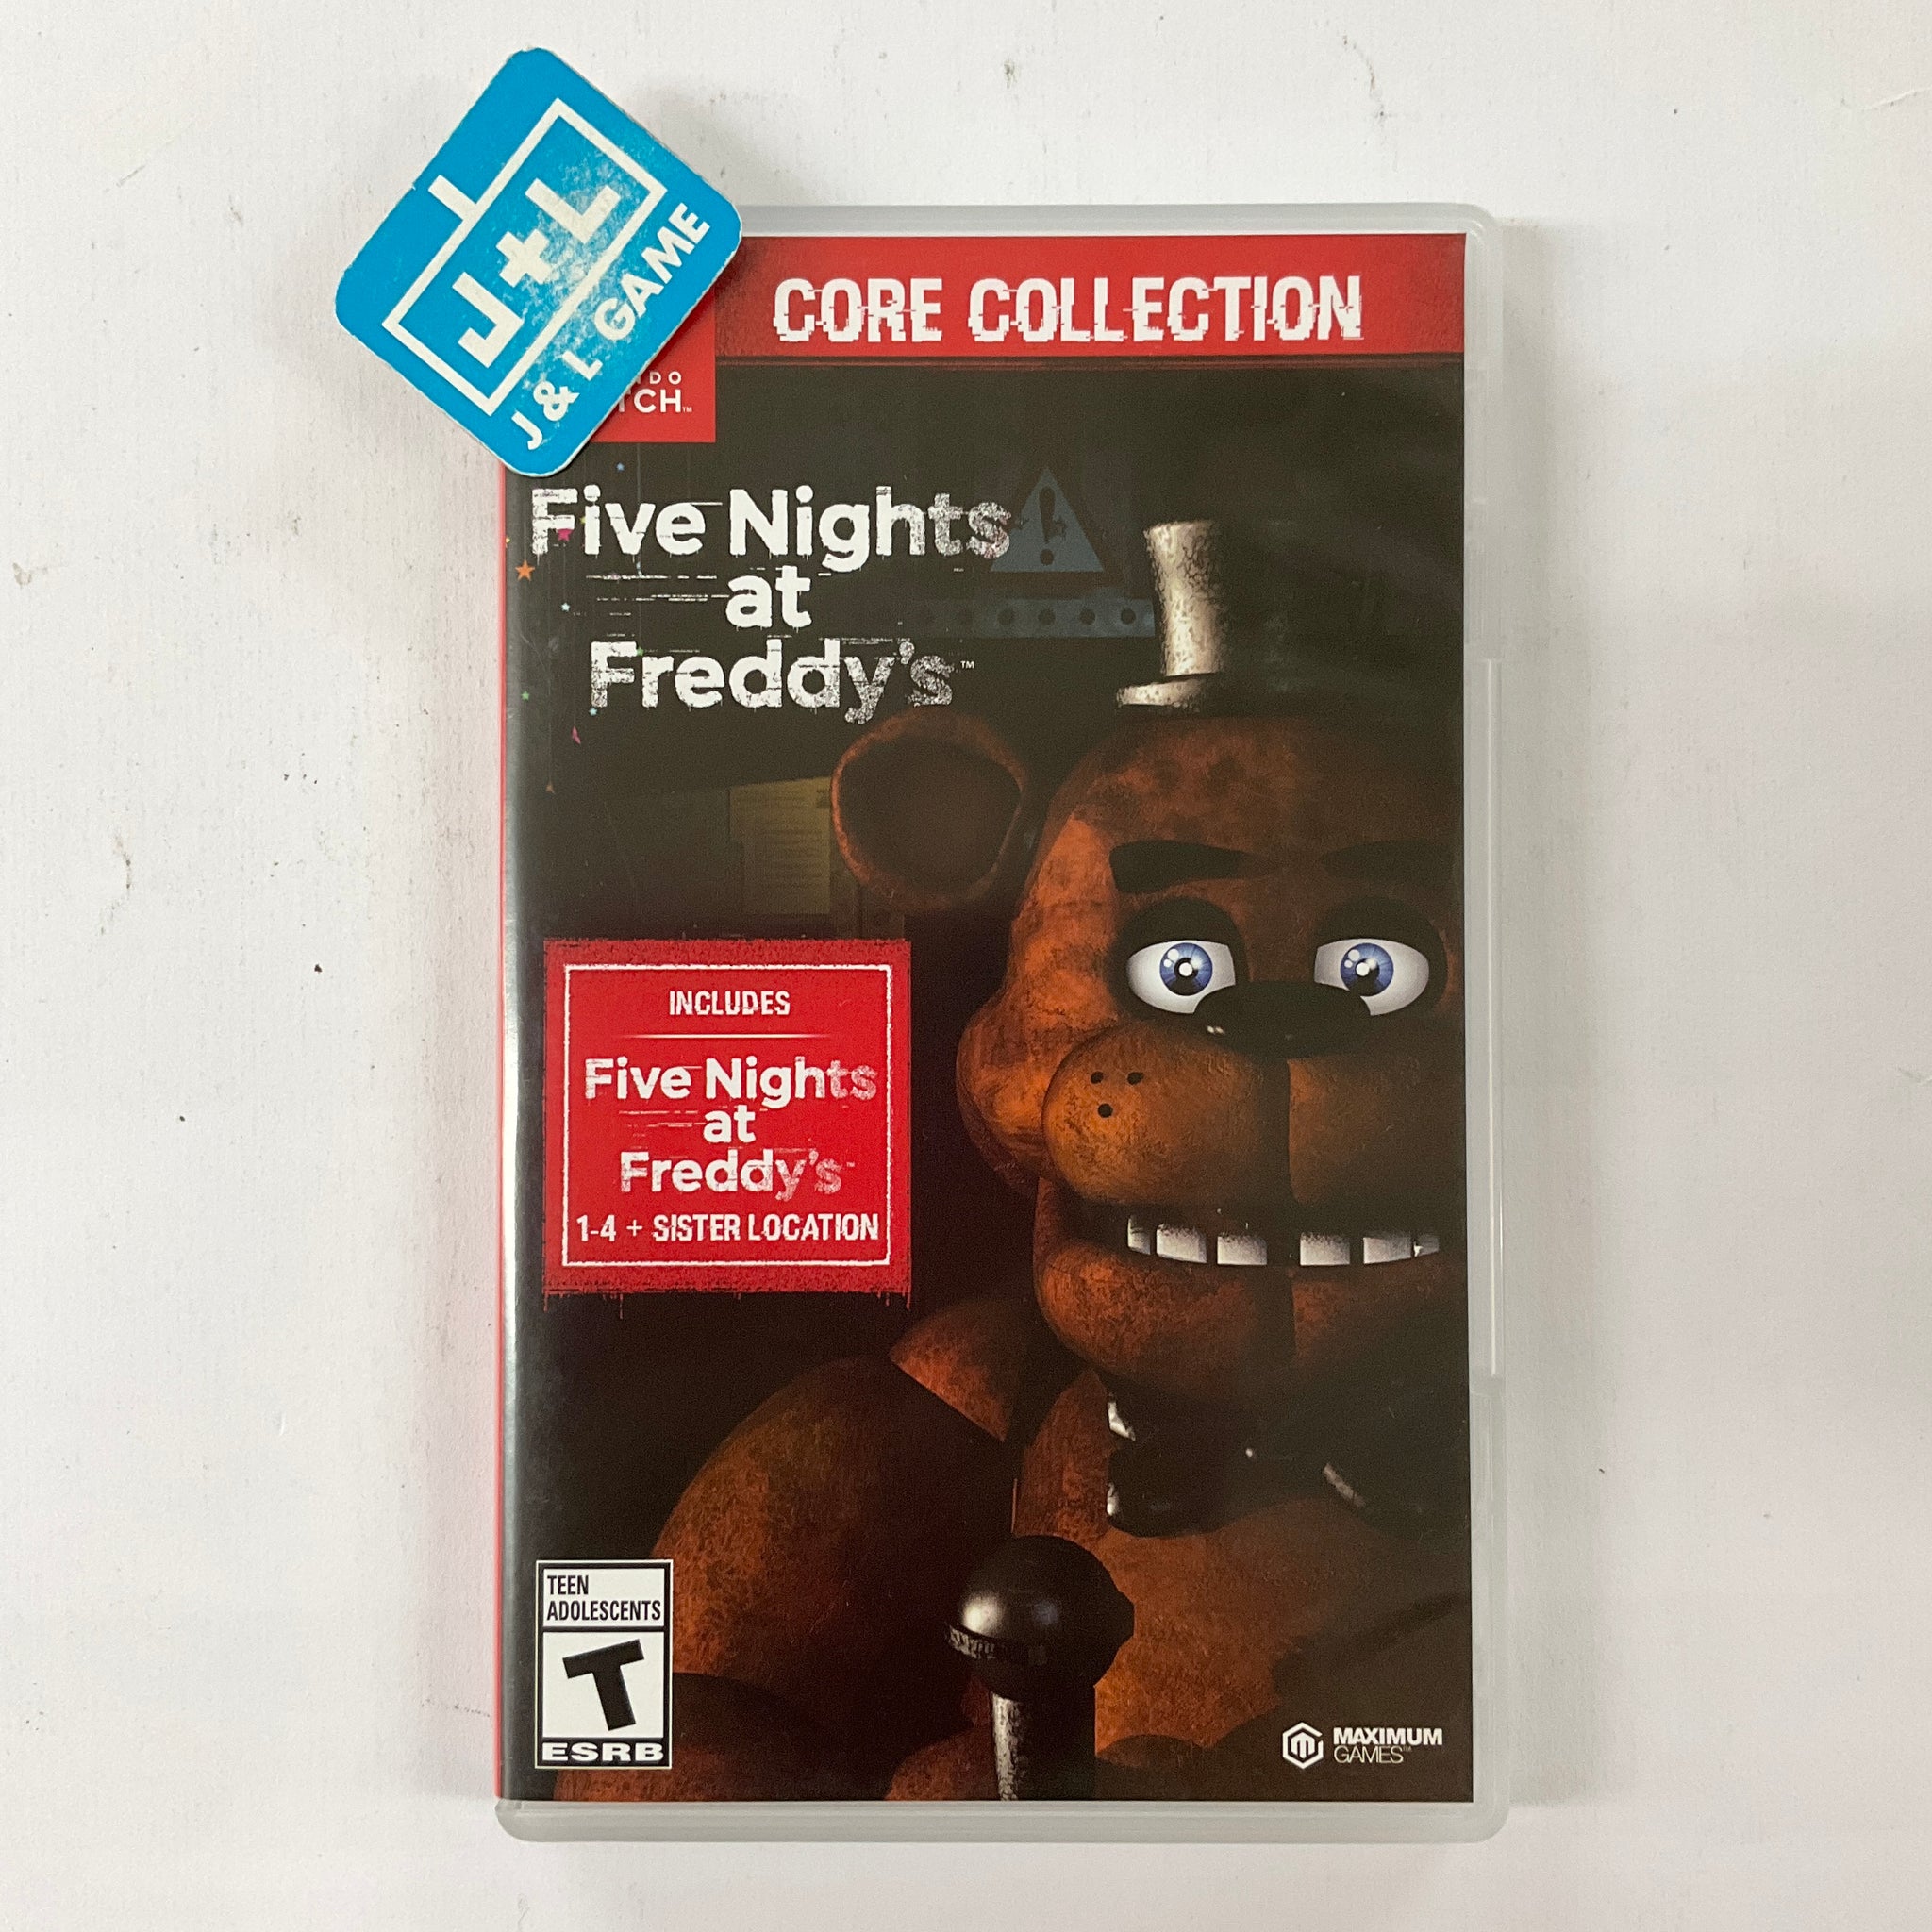 Five Nights at Freddy's: The Core Collection (NSW) - Nintendo Switch